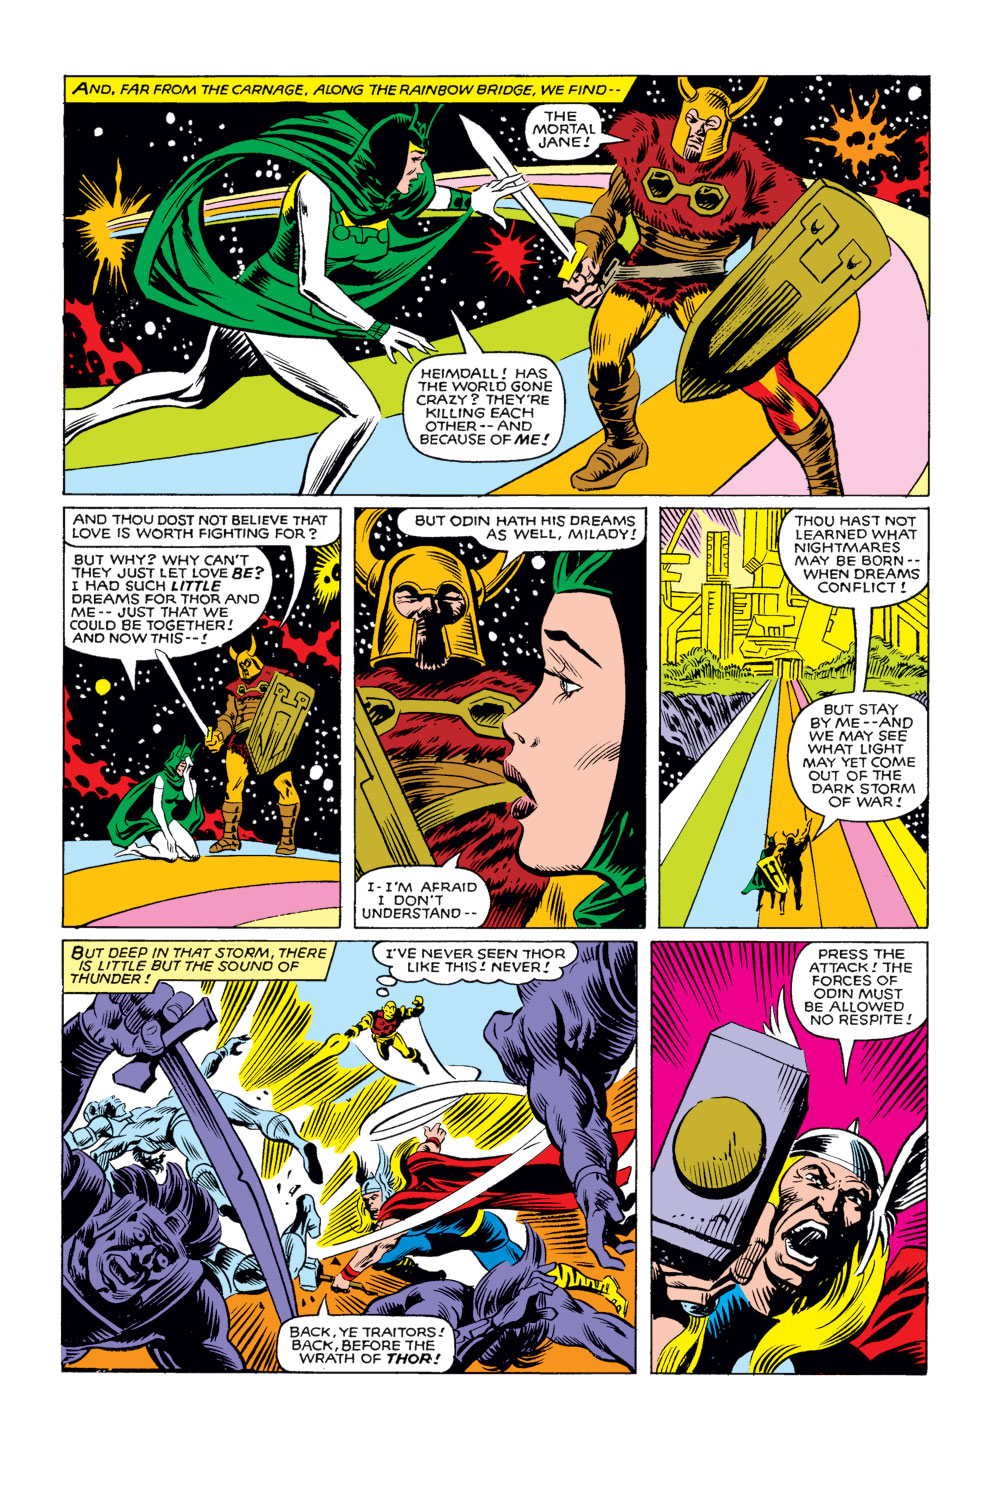 What If? (1977) issue 25 - Thor and the Avengers battled the gods - Page 19